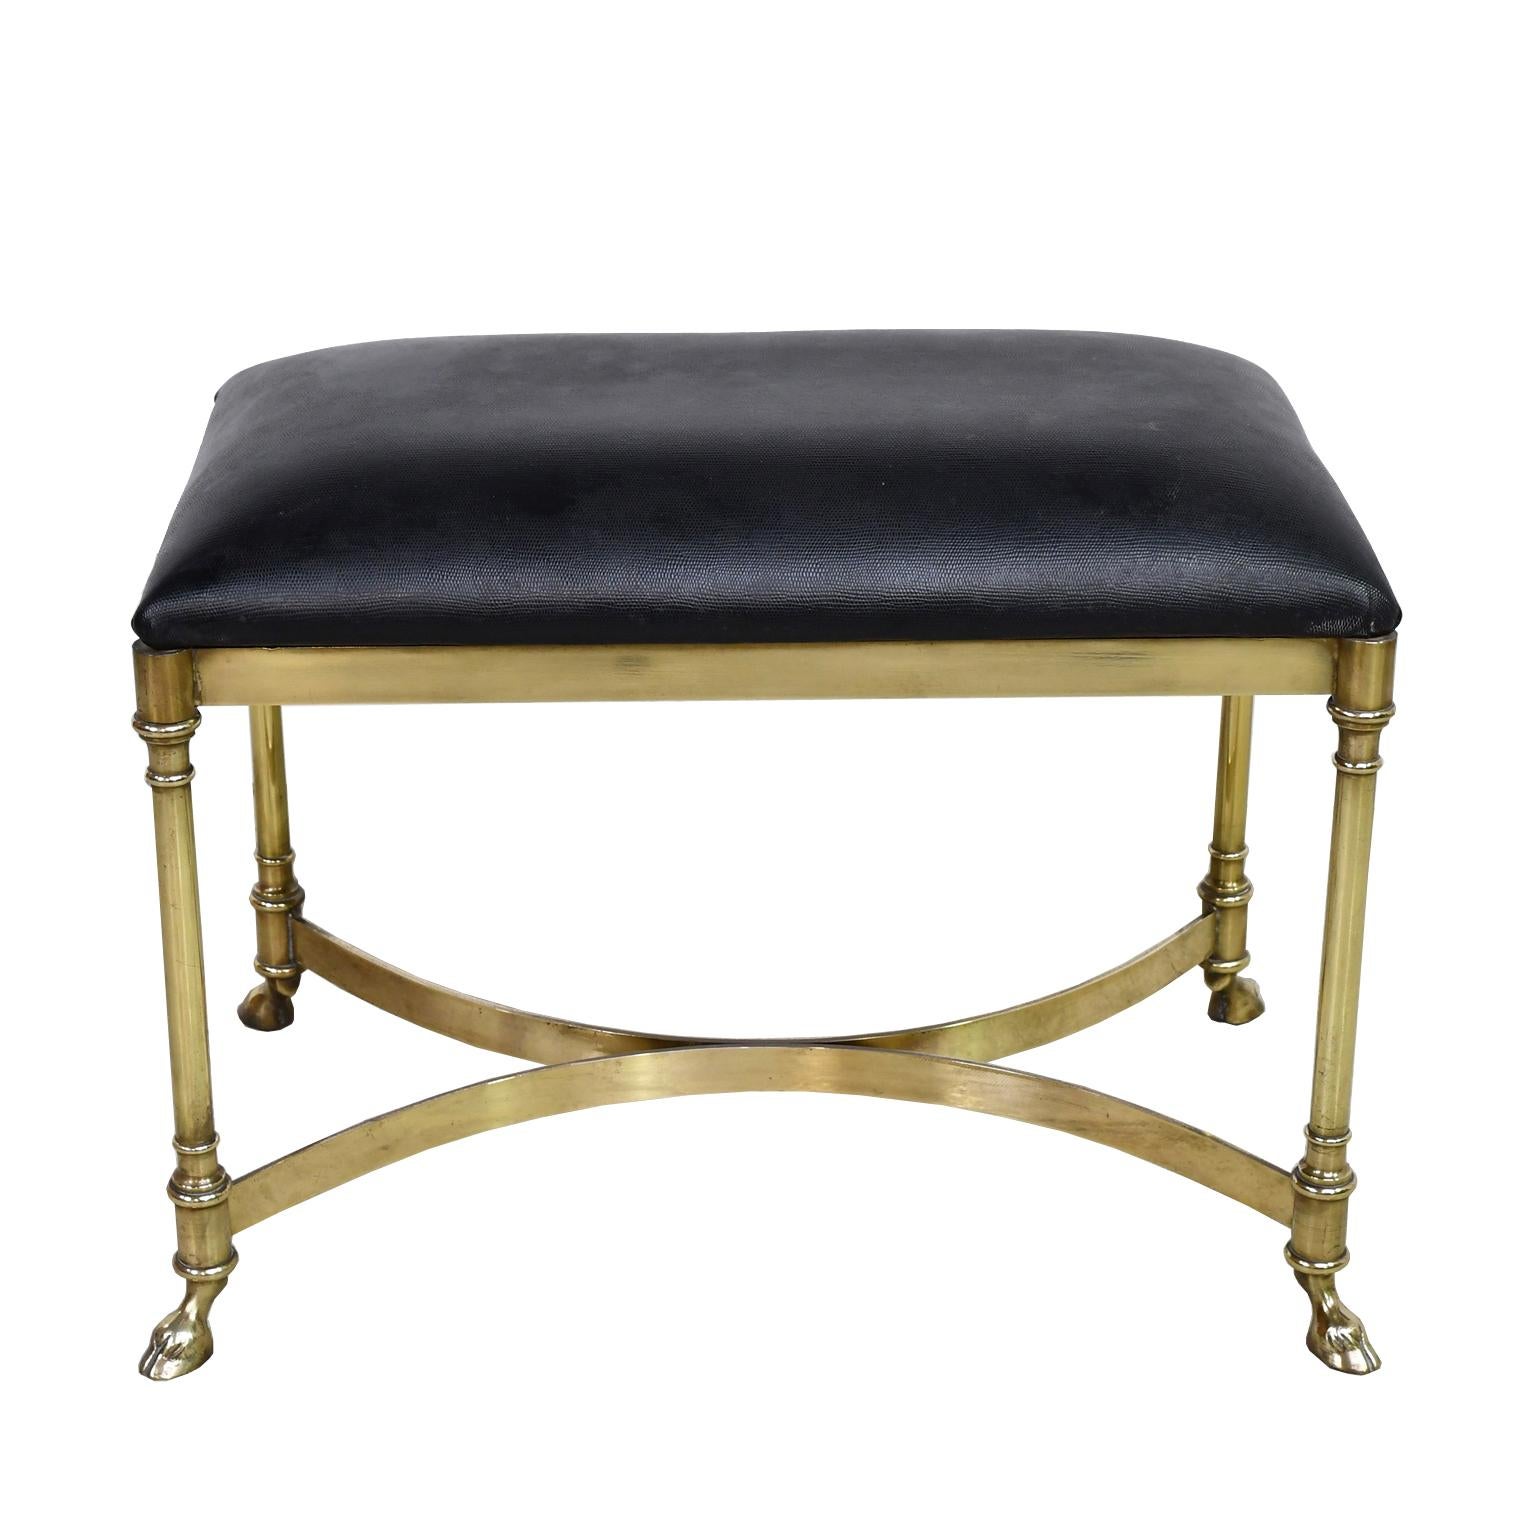 Neoclassical-Style Vintage Italian Stool w/ Brass Frame & Black Upholstered Seat 1